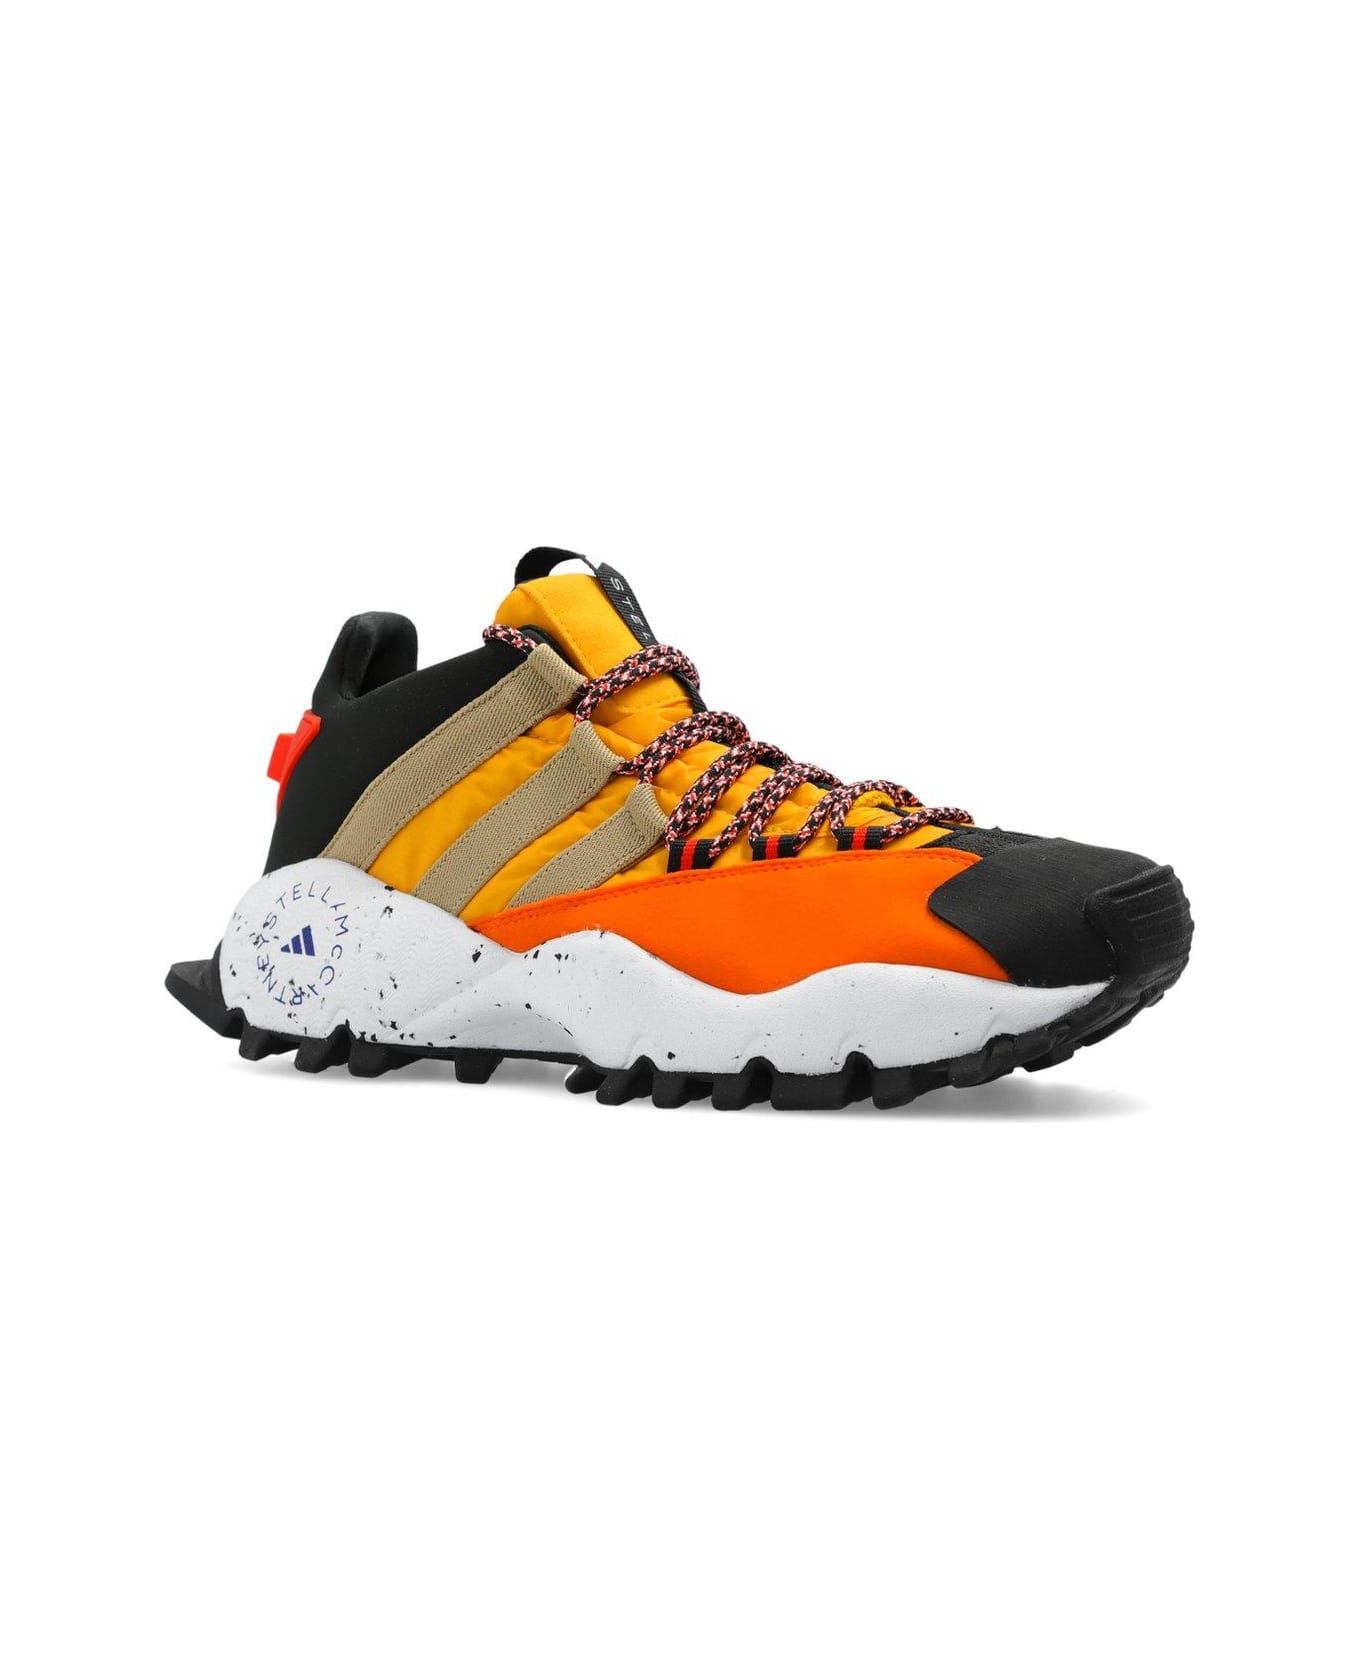 Adidas by Stella McCartney Seeulater Lace-up Sneakers - ORANGE